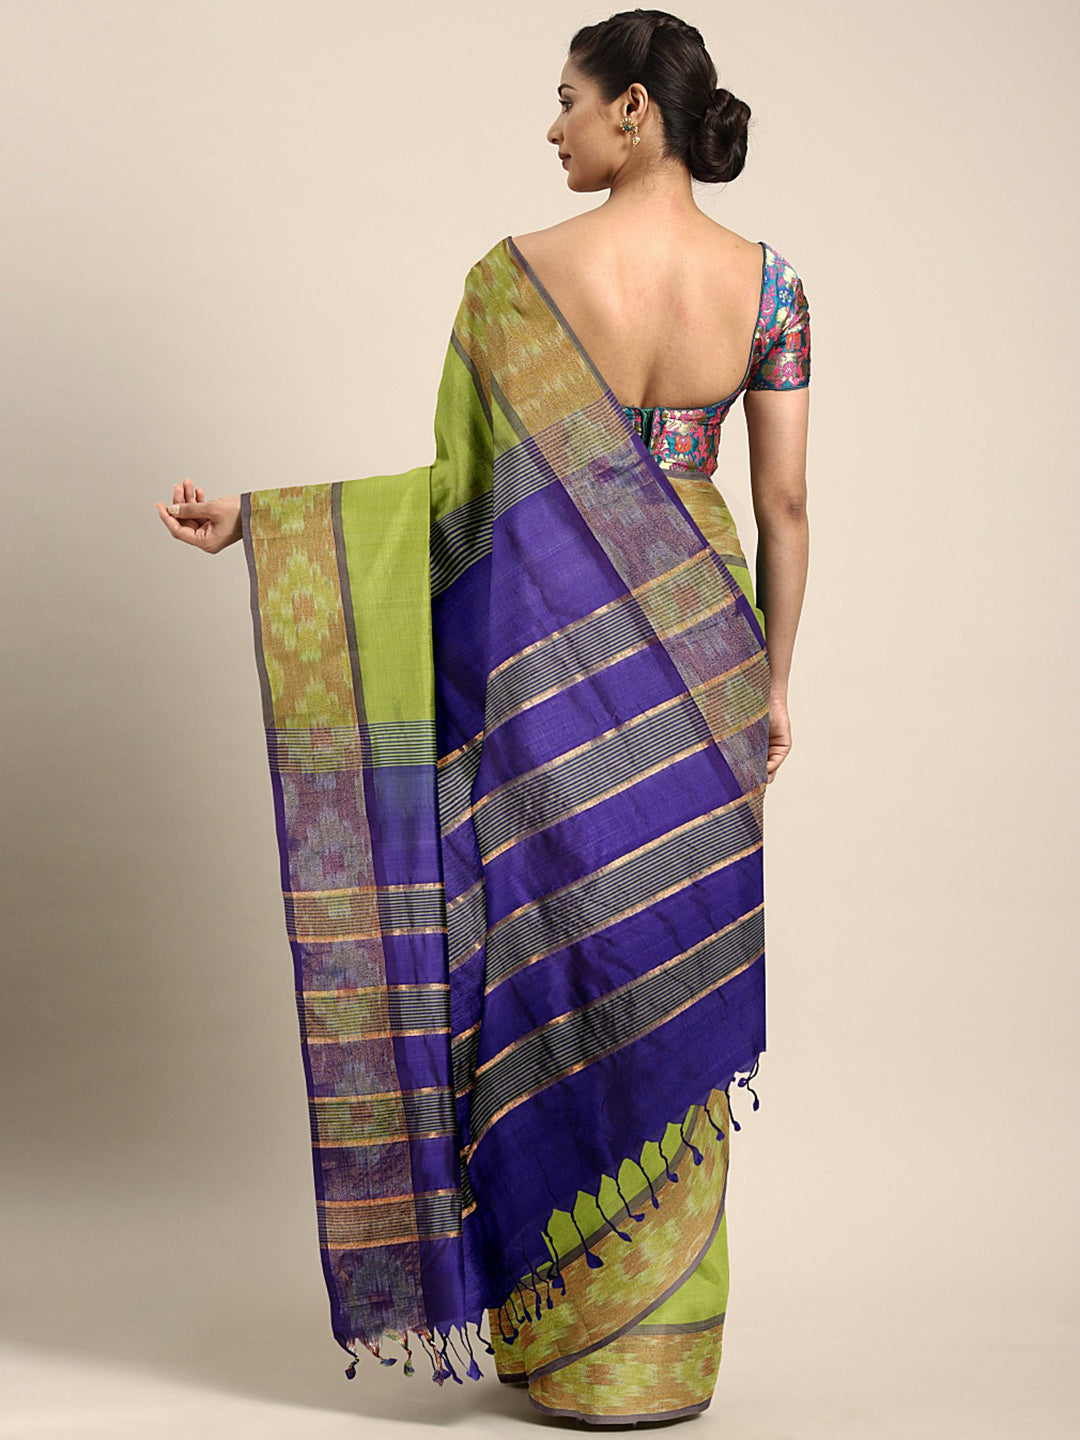 Kalakari India Upppada Silk Woven Saree With Blouse SKHSSA0004-Saree-Kalakari India-SKHSSA0004-Bollywood, Geographical Indication, Hand Crafted, Heritage Prints, Natural Dyes, Sarees, South Silk, Sustainable Fabrics, Uppada Silk, Woven-[Linen,Ethnic,wear,Fashionista,Handloom,Handicraft,Indigo,blockprint,block,print,Cotton,Chanderi,Blue, latest,classy,party,bollywood,trendy,summer,style,traditional,formal,elegant,unique,style,hand,block,print, dabu,booti,gift,present,glamorous,affordable,collecti